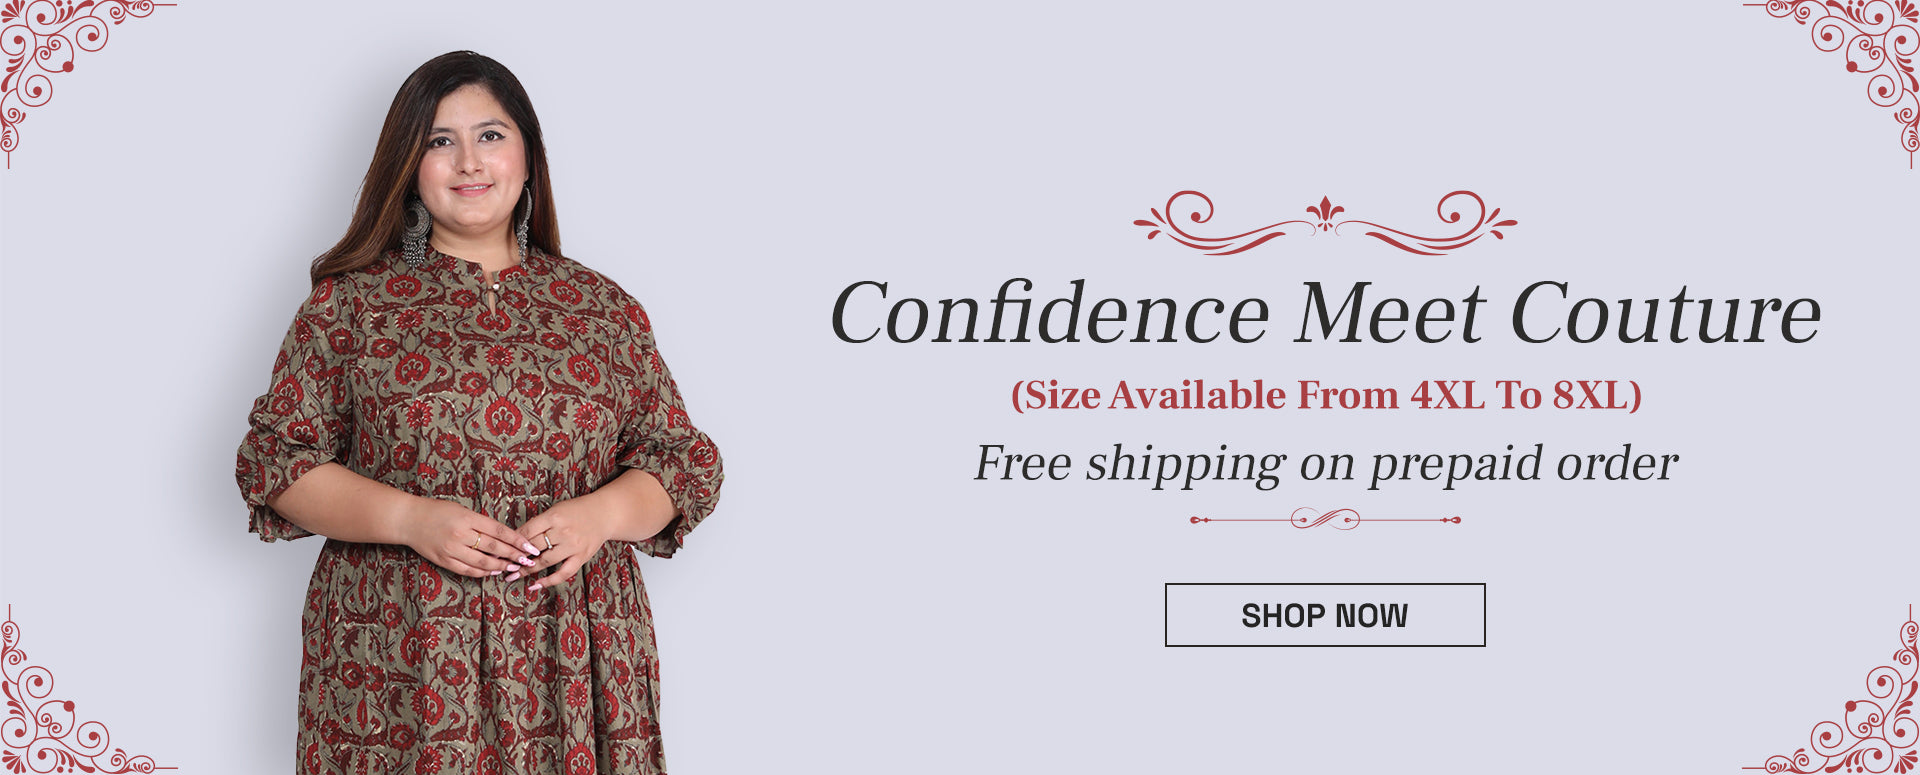 Women with Plus size kurta set in a banner